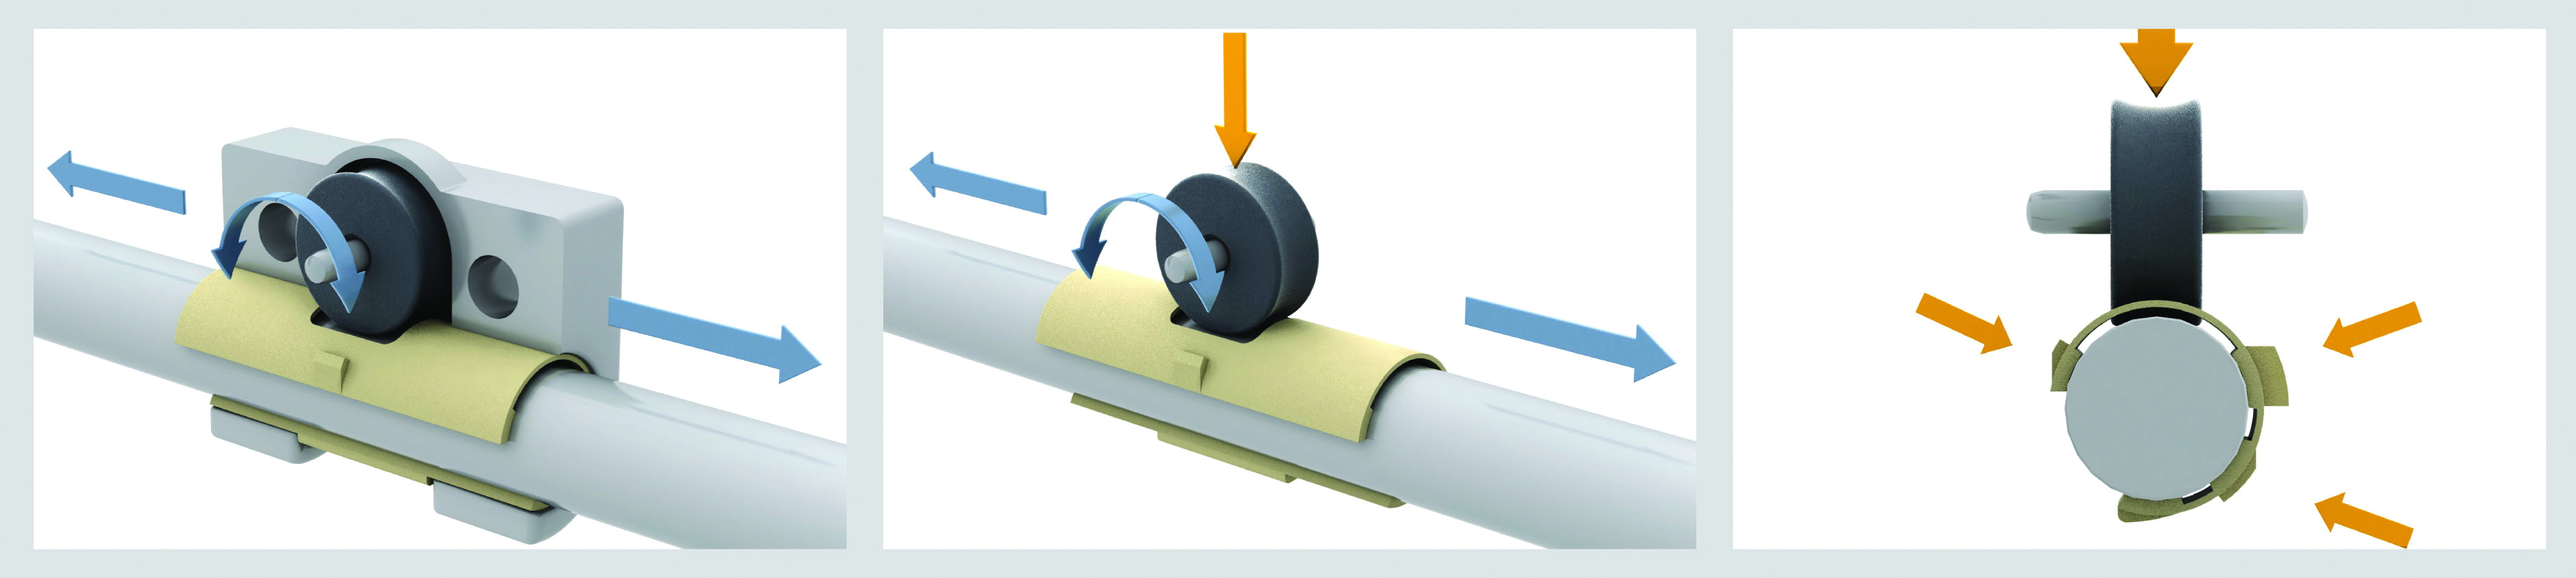 The innovative hybrid linear bearing DryLin® WJRM from igus UK combines rolling and sliding. It was developed for the manual adjustment of machine and guard doors up to 50 kg.